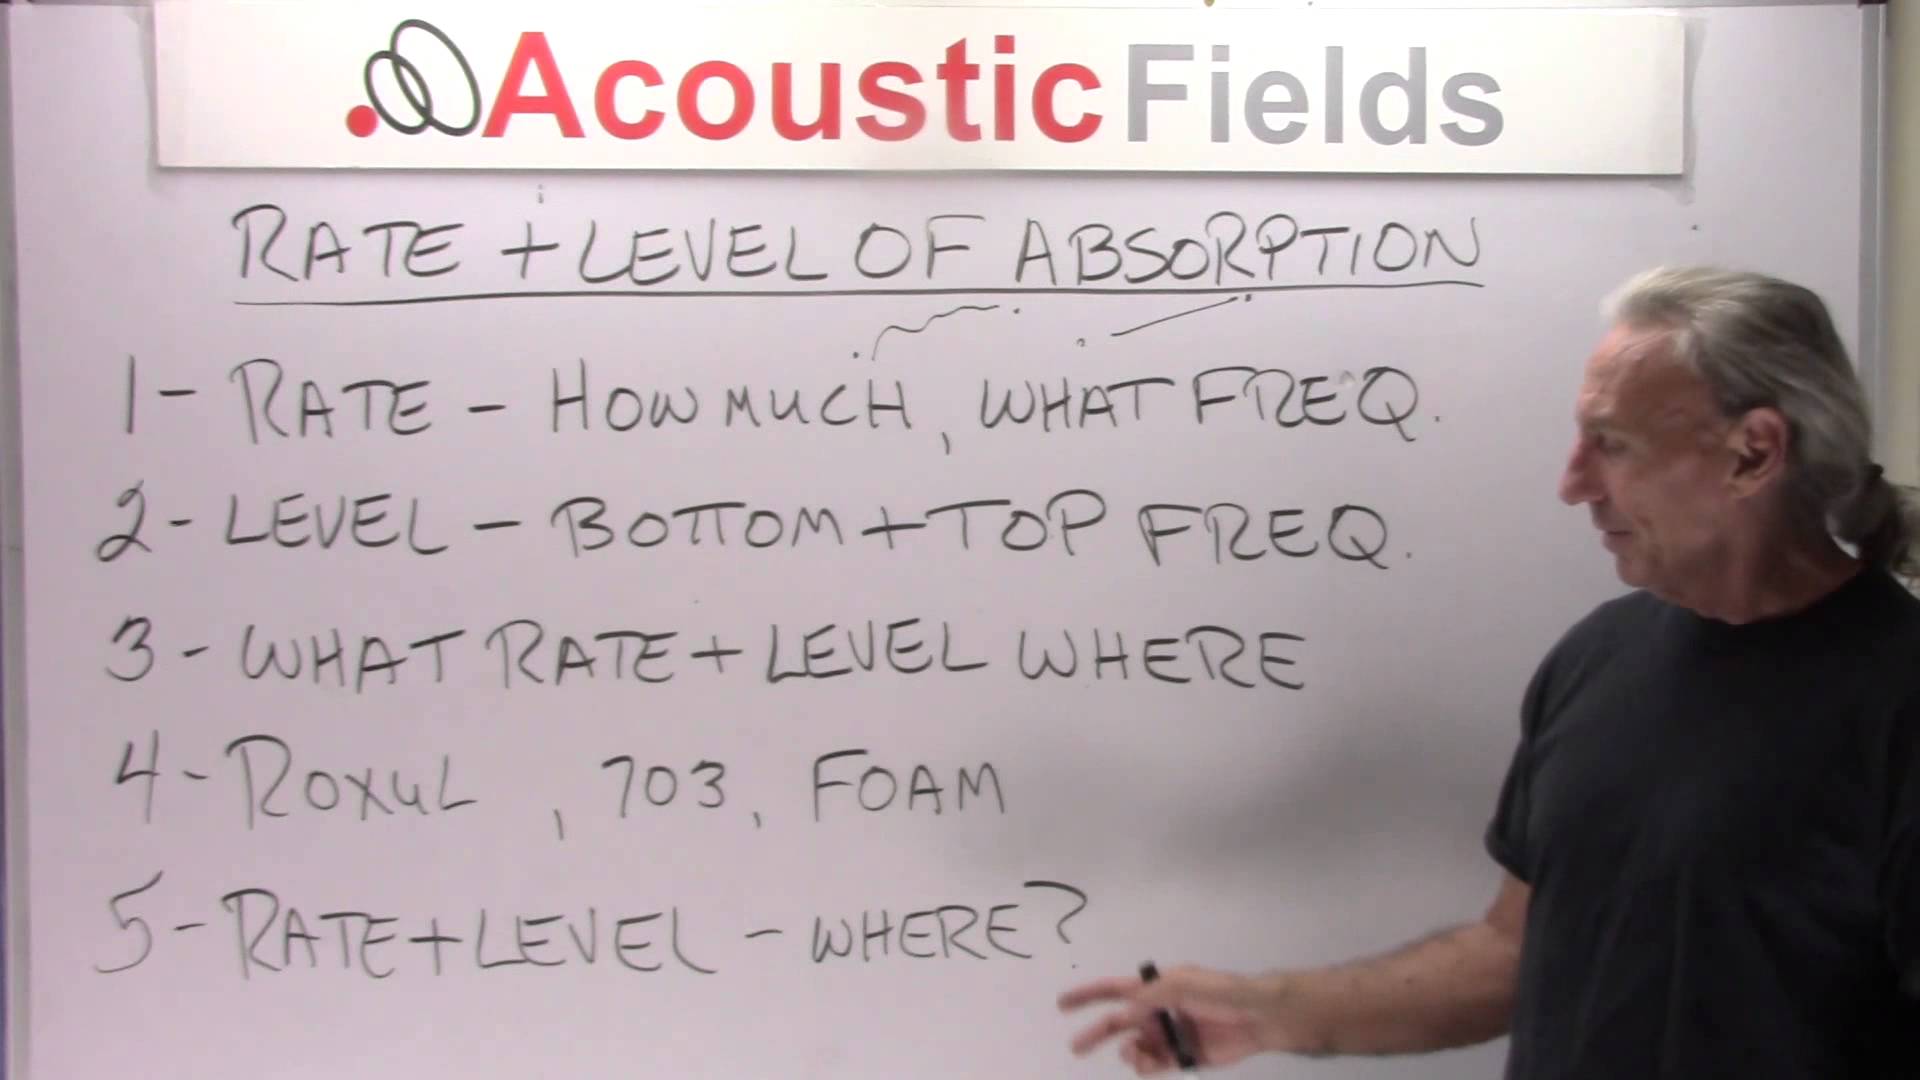 Rate & Level Of Absorption